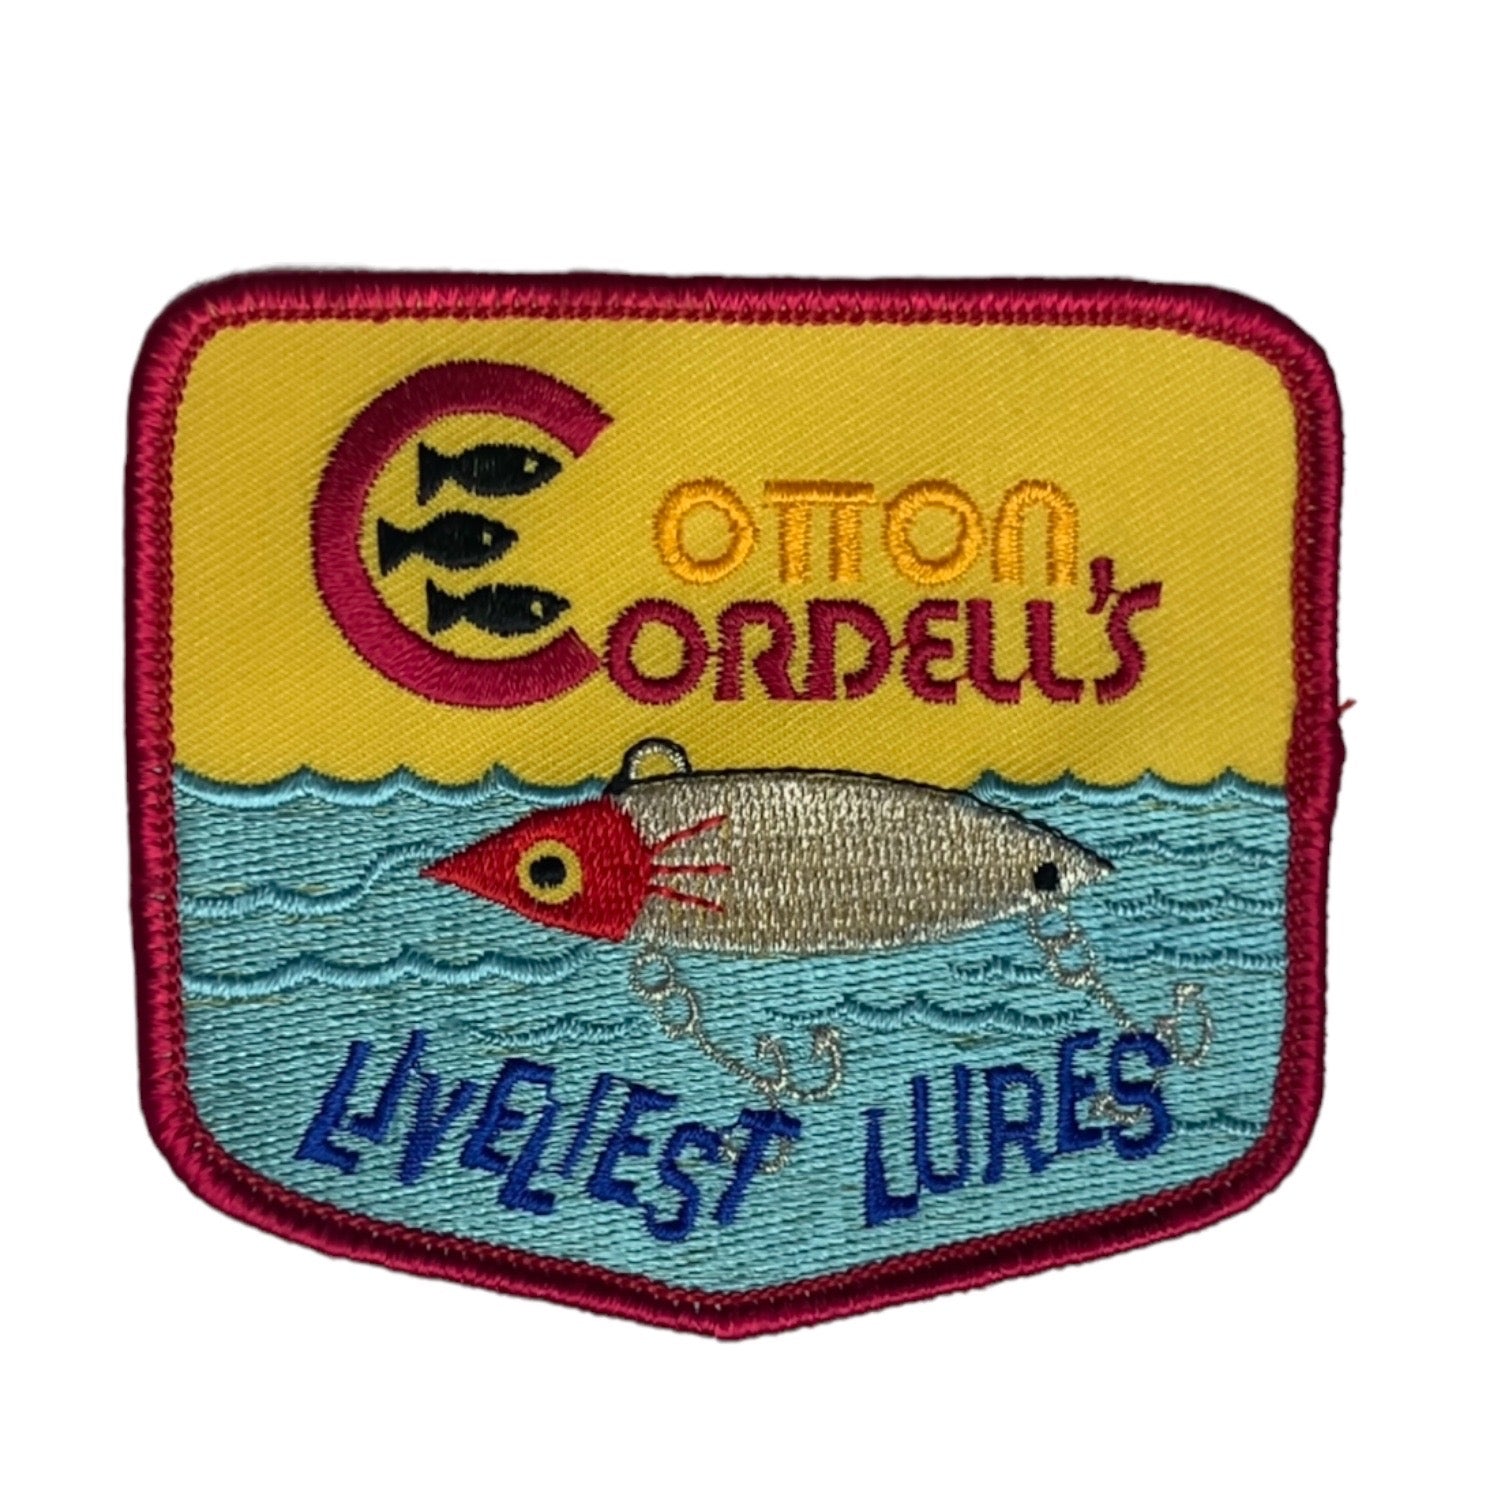 Cordell • COTTON CORDELL'S LIVELIEST LURES Vintage Patch – Toad Tackle